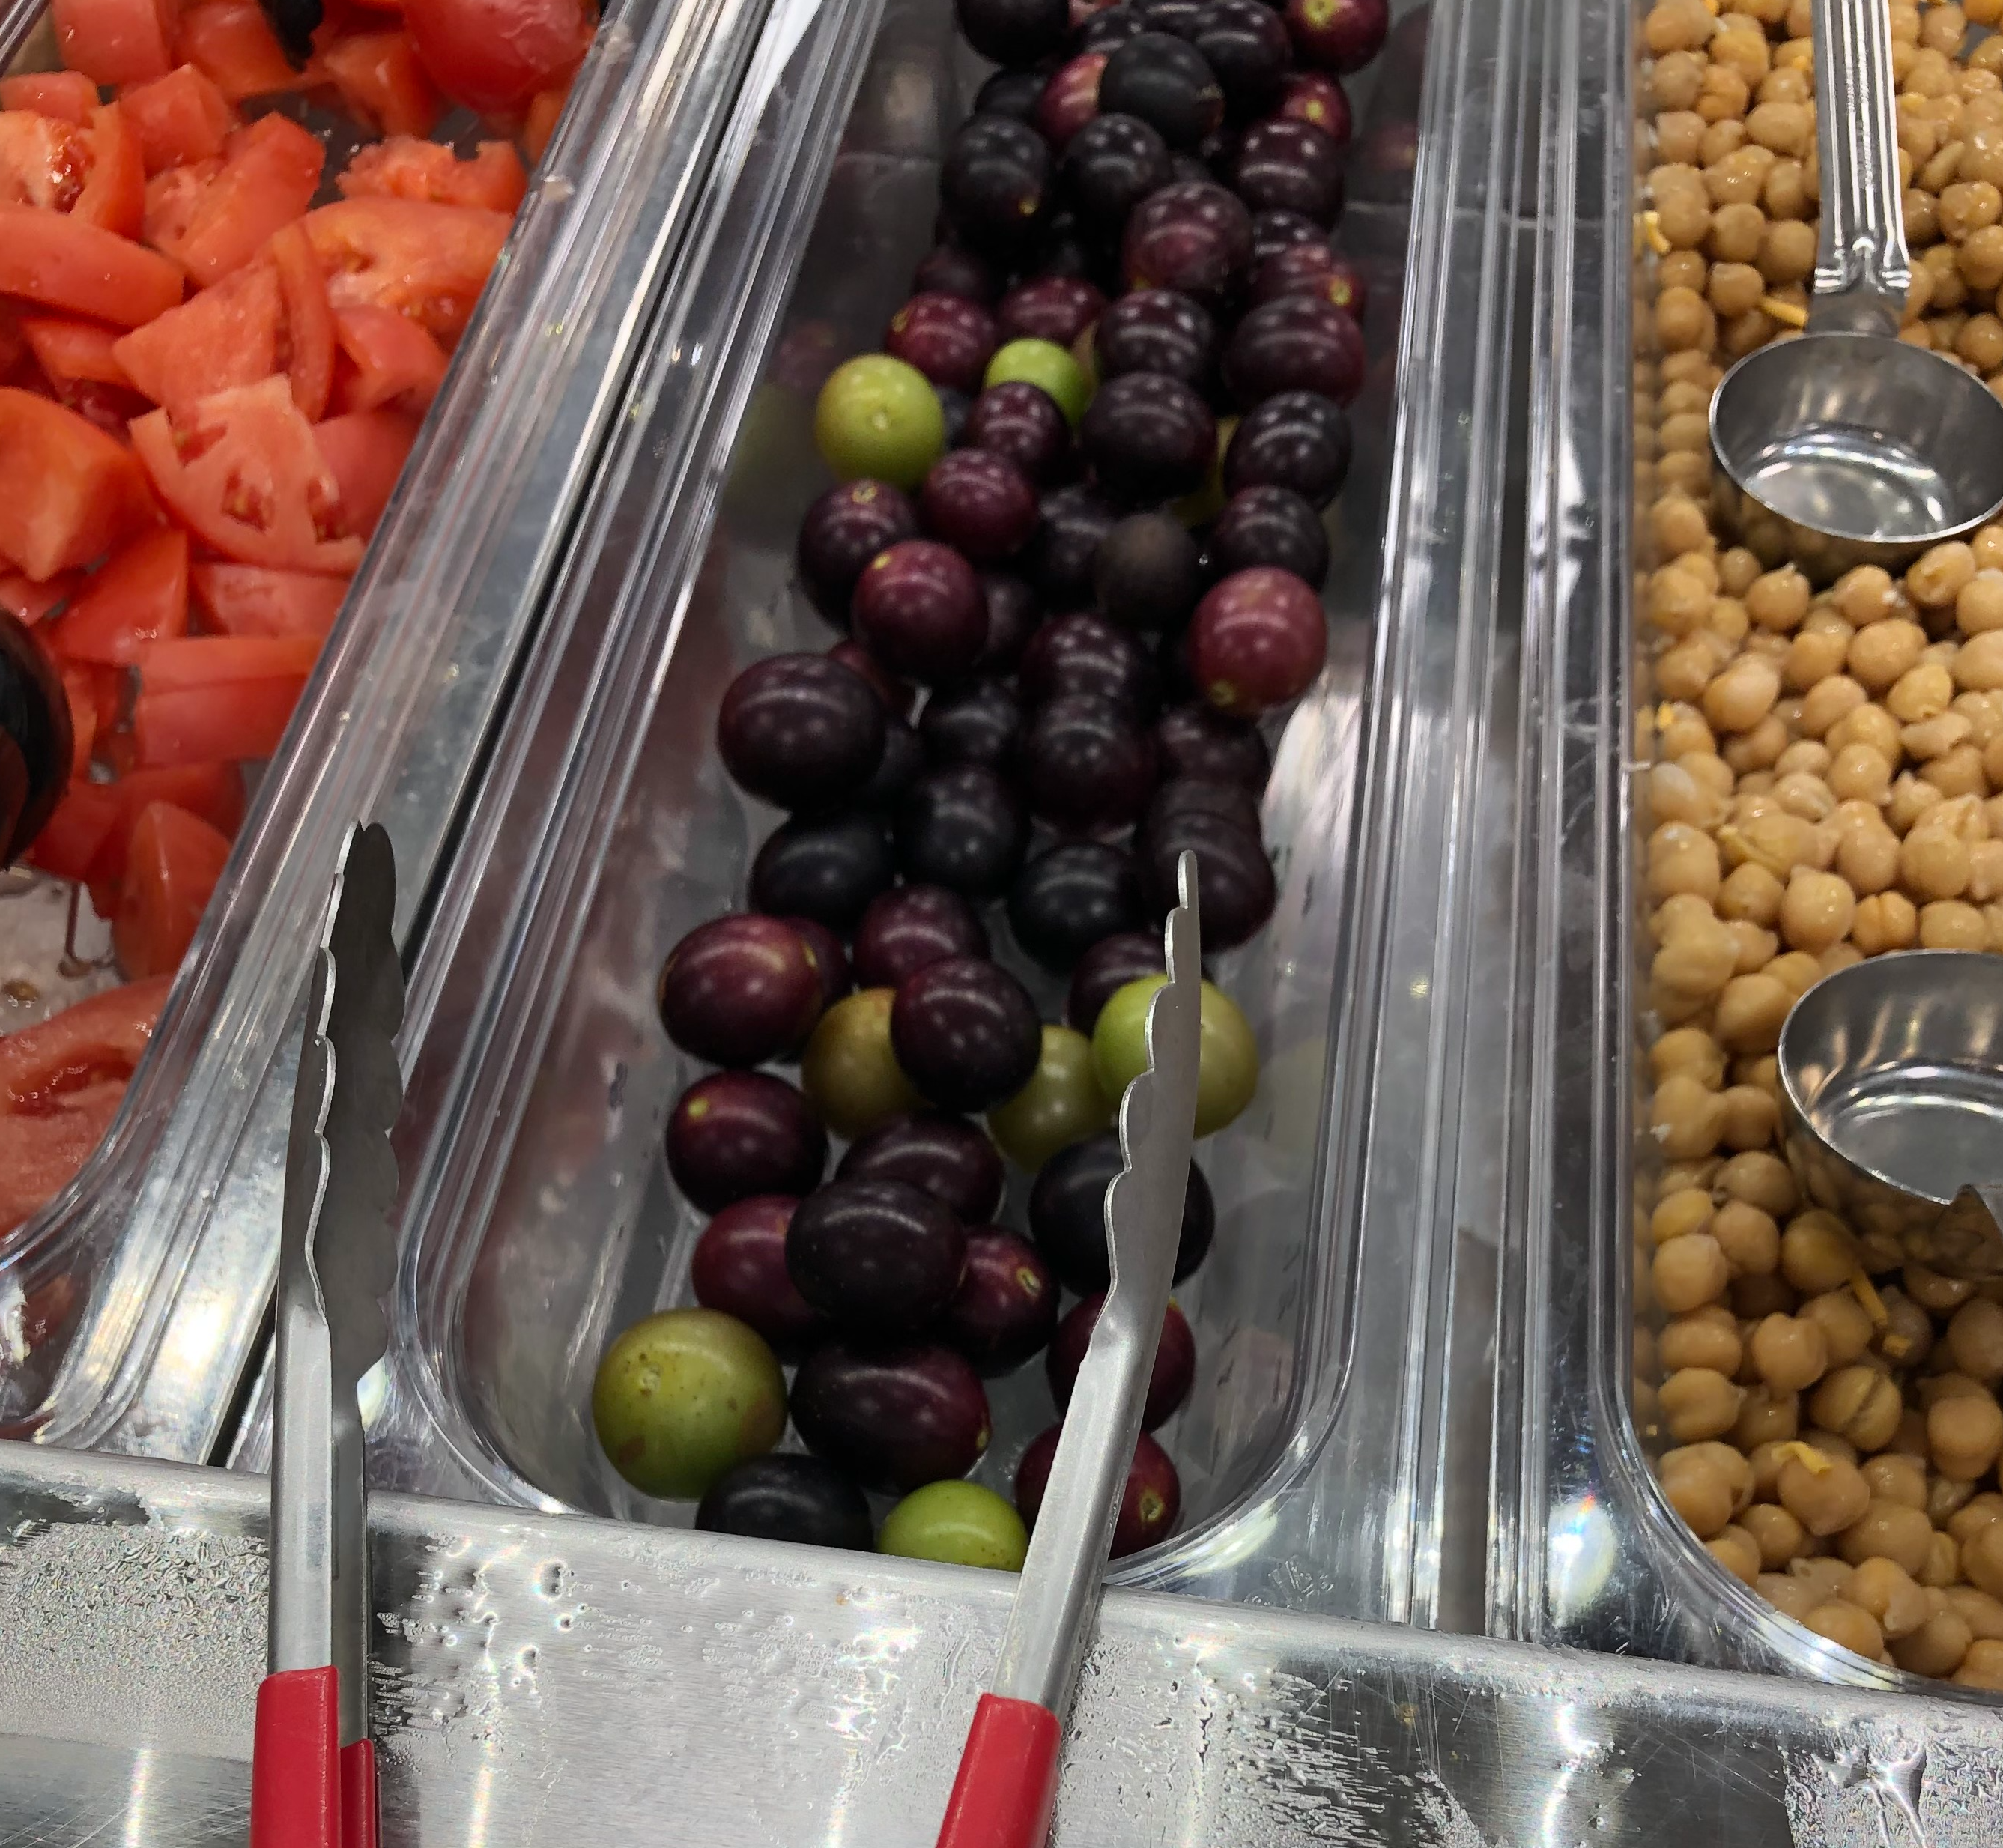 Delicious Hometown Harvest Dahlonega (HHD) grown muscadines on all salad bars!  Fall '22